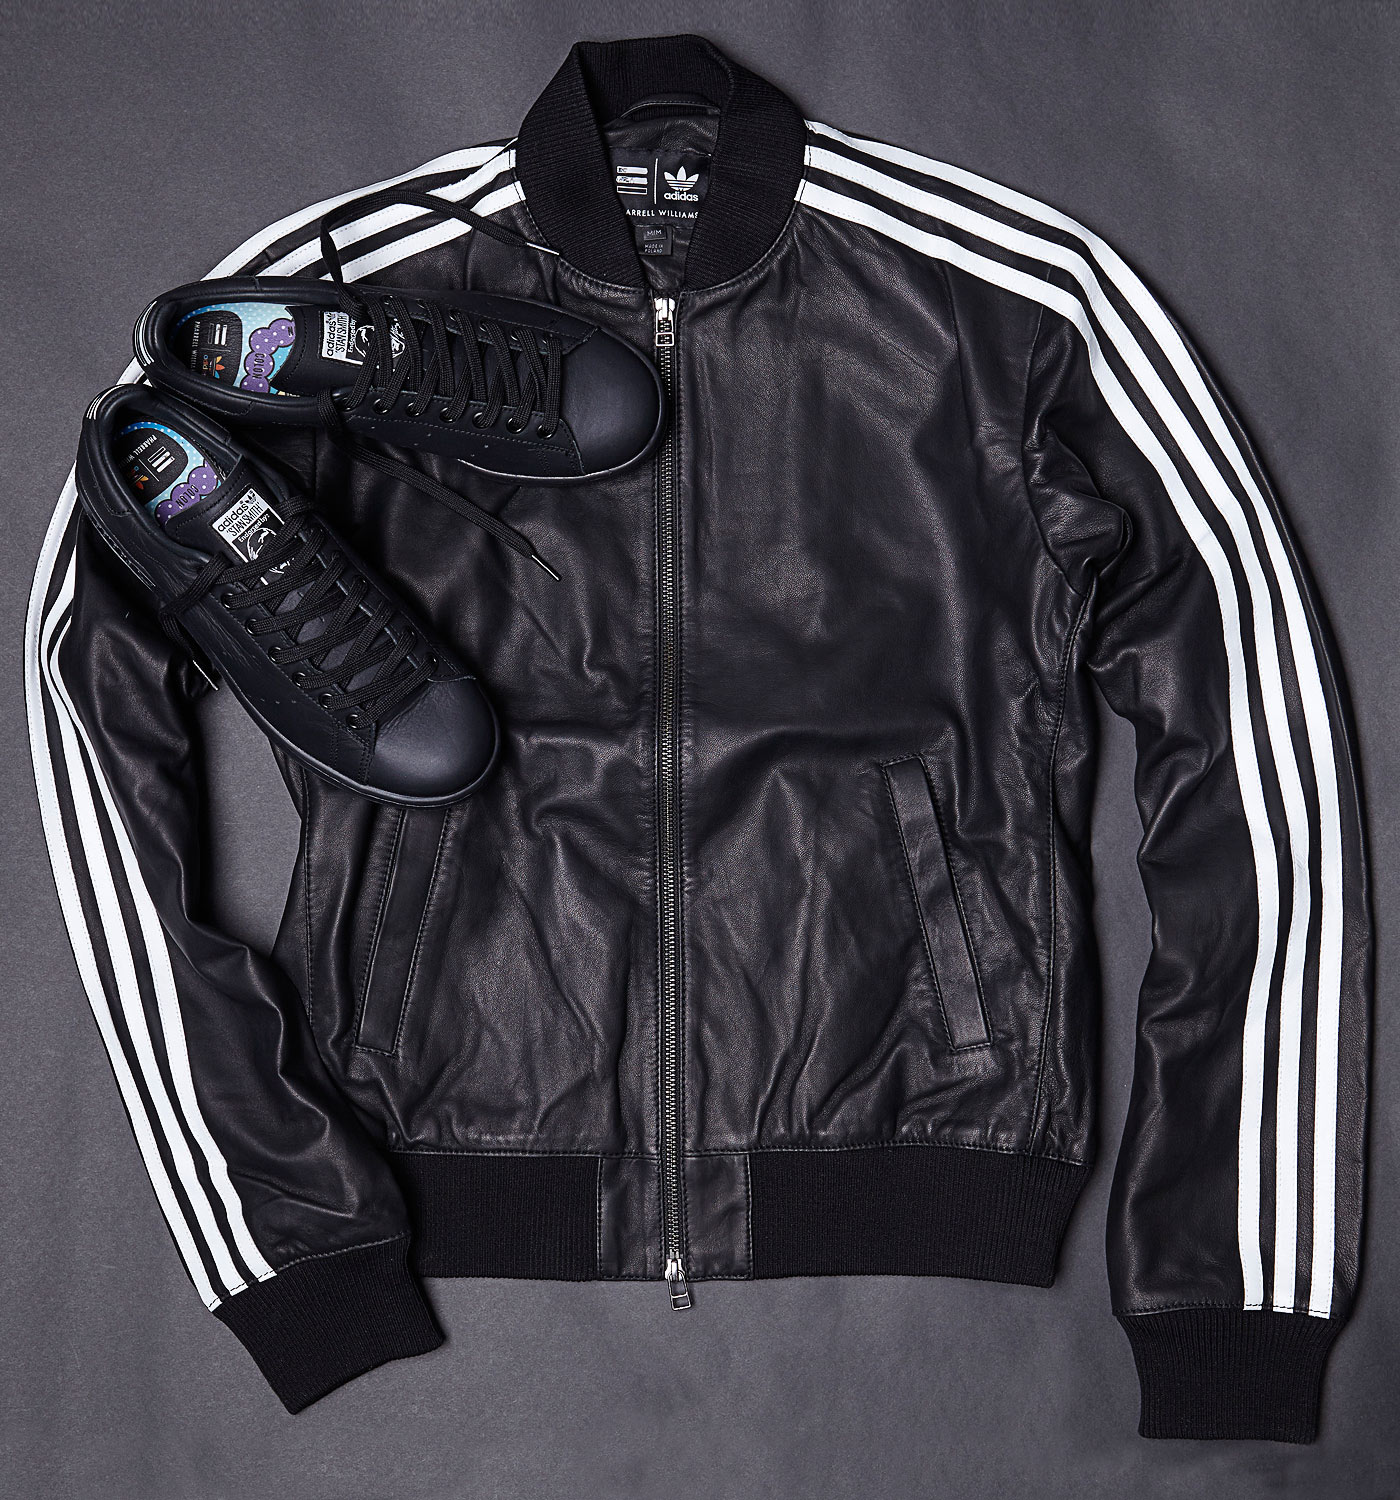 giacca adidas pelle